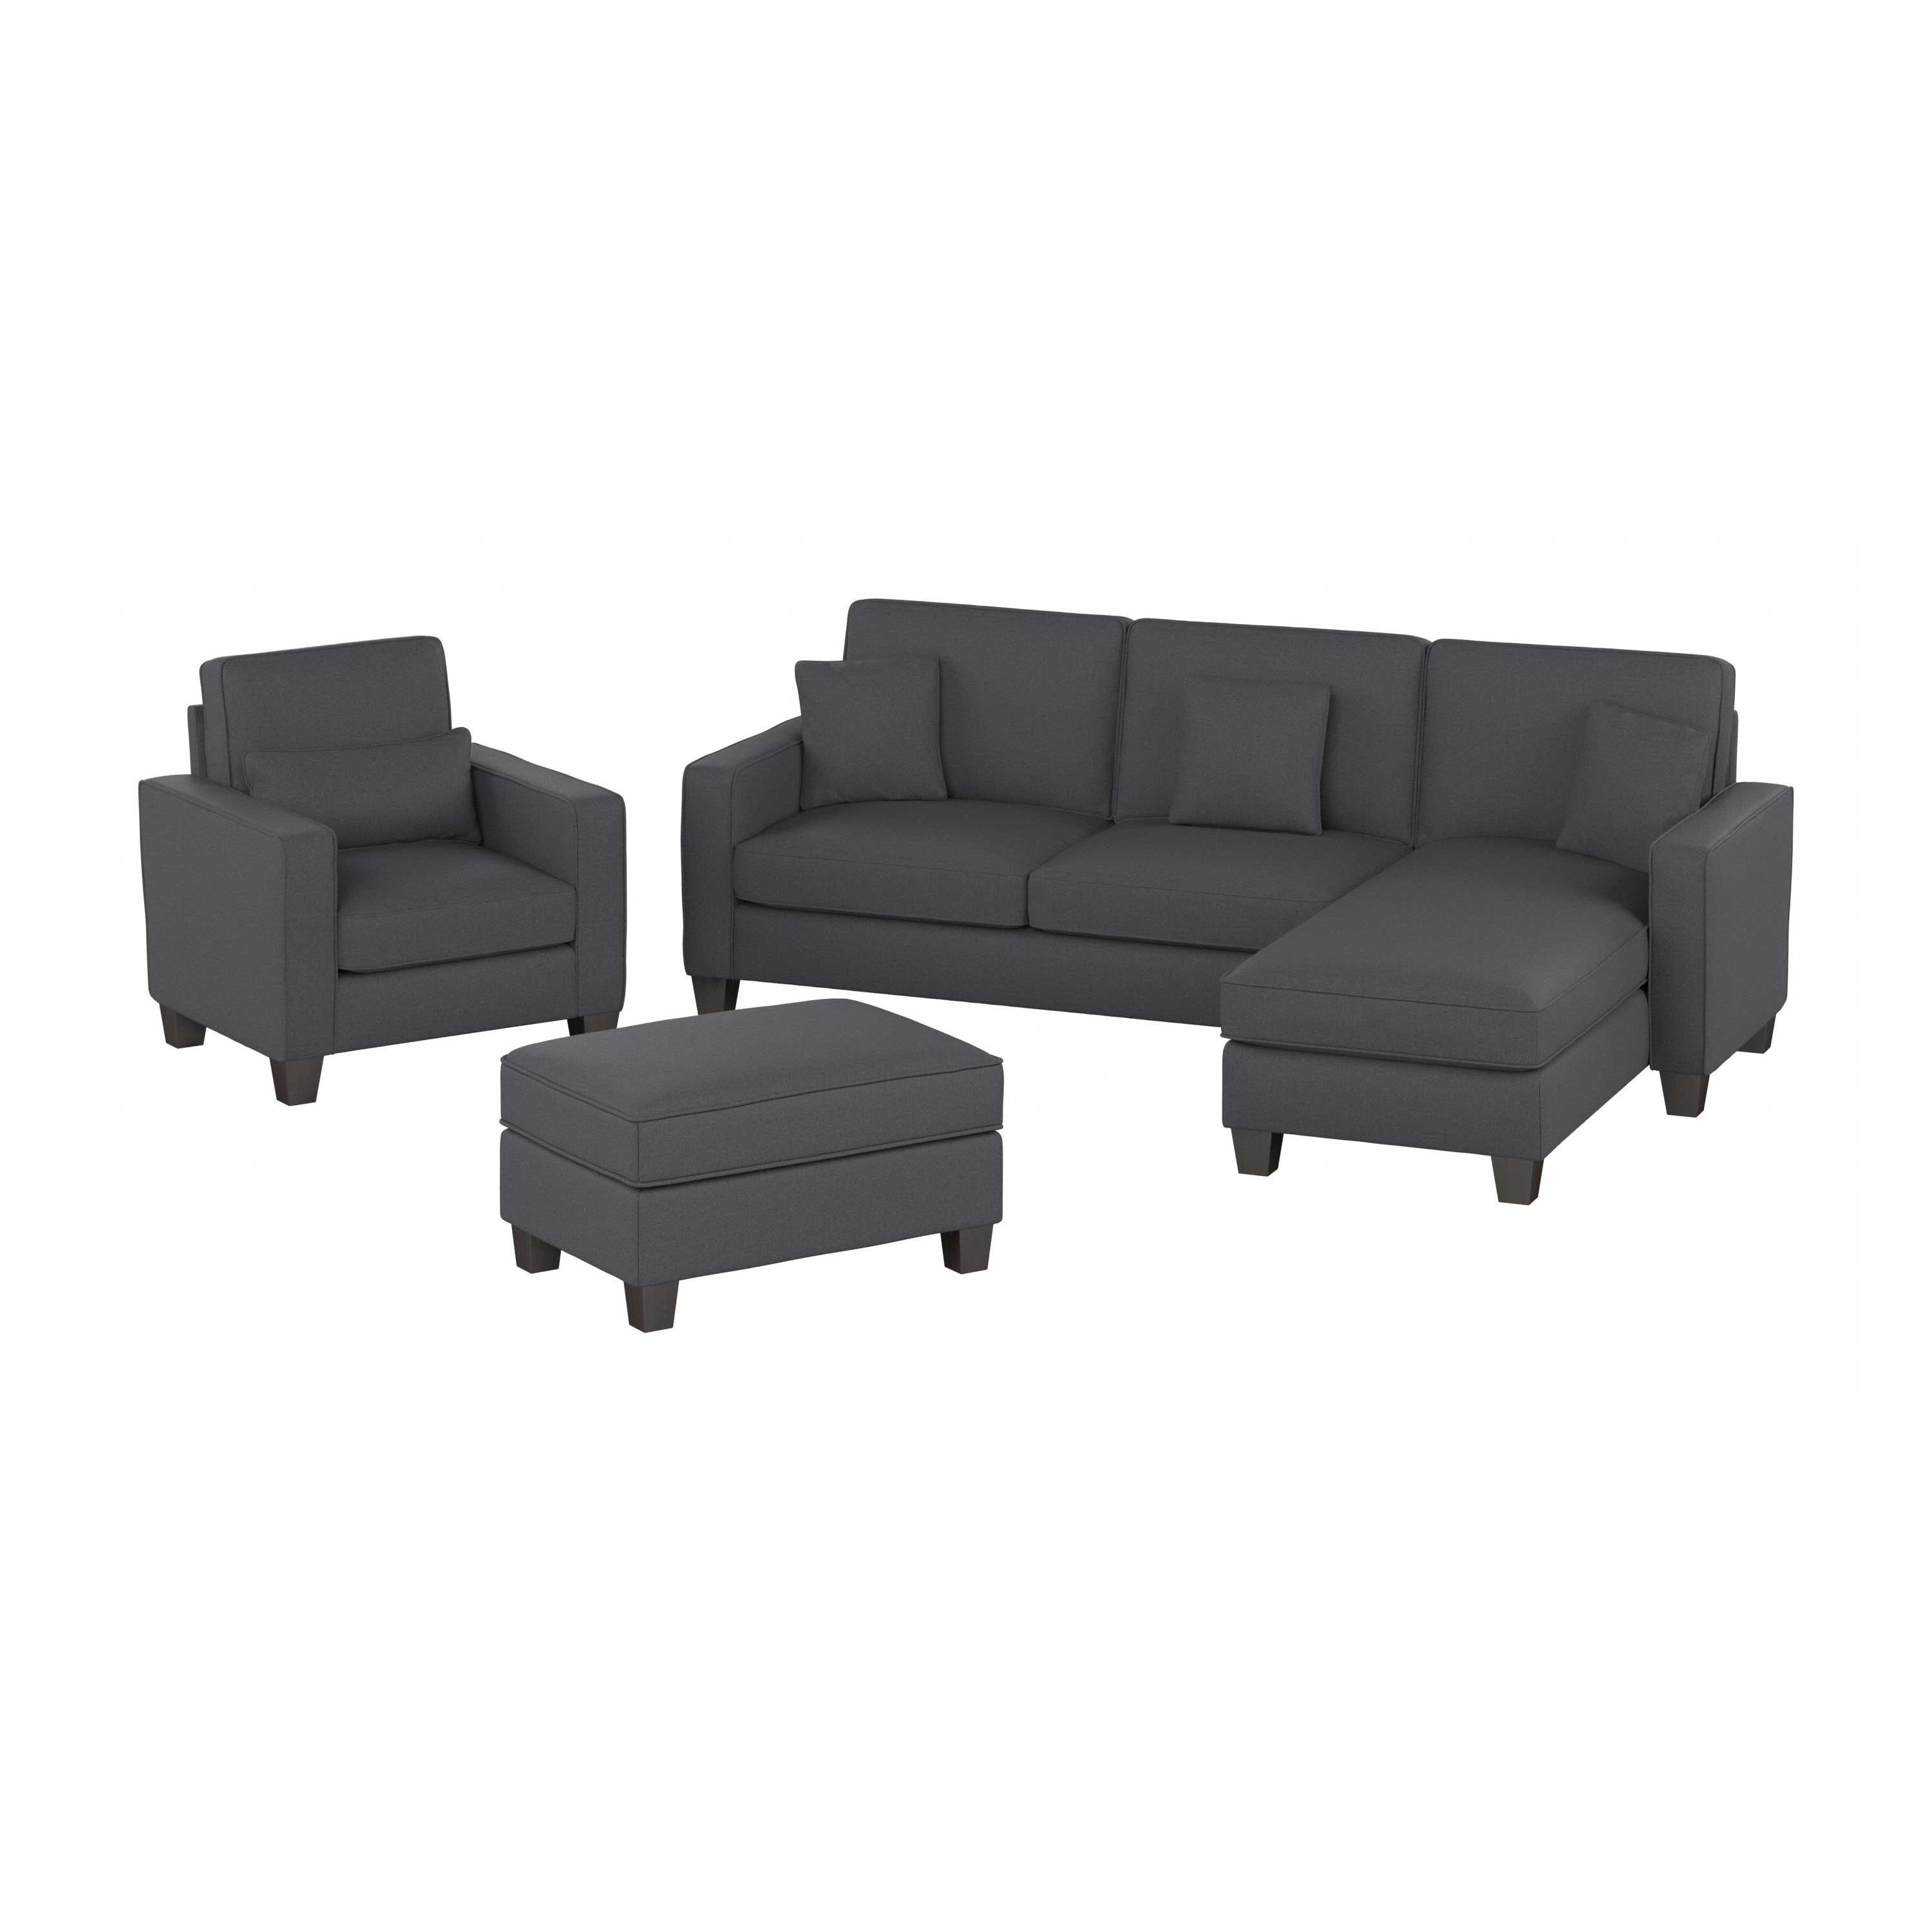 Shop Bush Furniture Stockton 102W Sectional Couch with Reversible Chaise Lounge, Accent Chair, and Ottoman 02 SKT021CGH #color_charcoal gray herringbone fabr